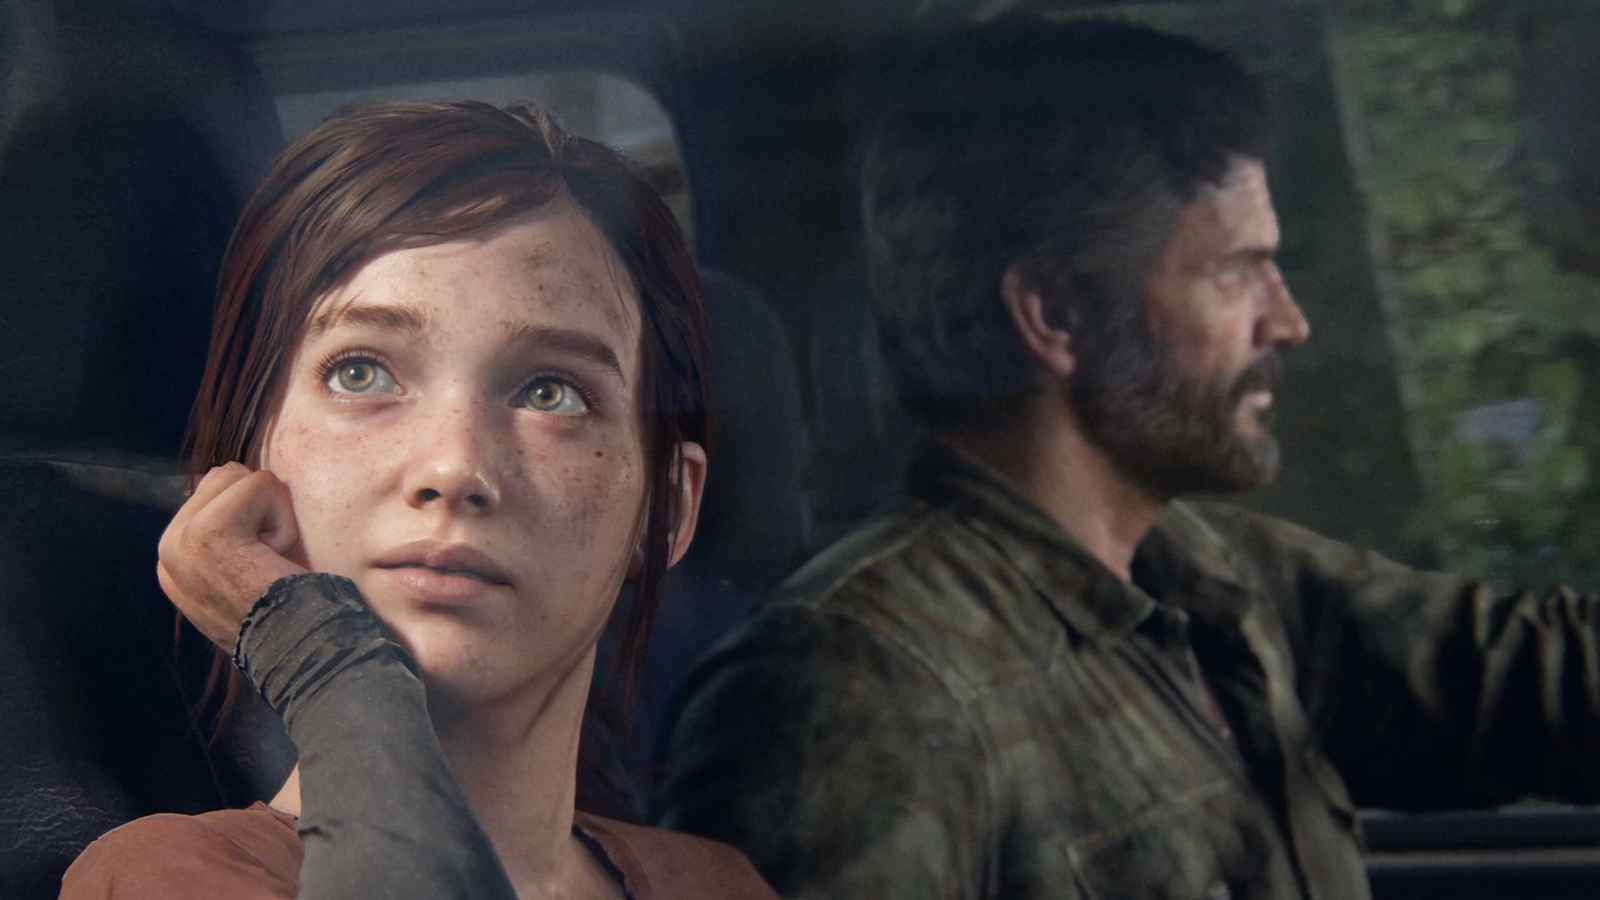 The Last of Us 2: OFFICIALLY COMING TO PS5 (TLOU 2 REMASTERED) 